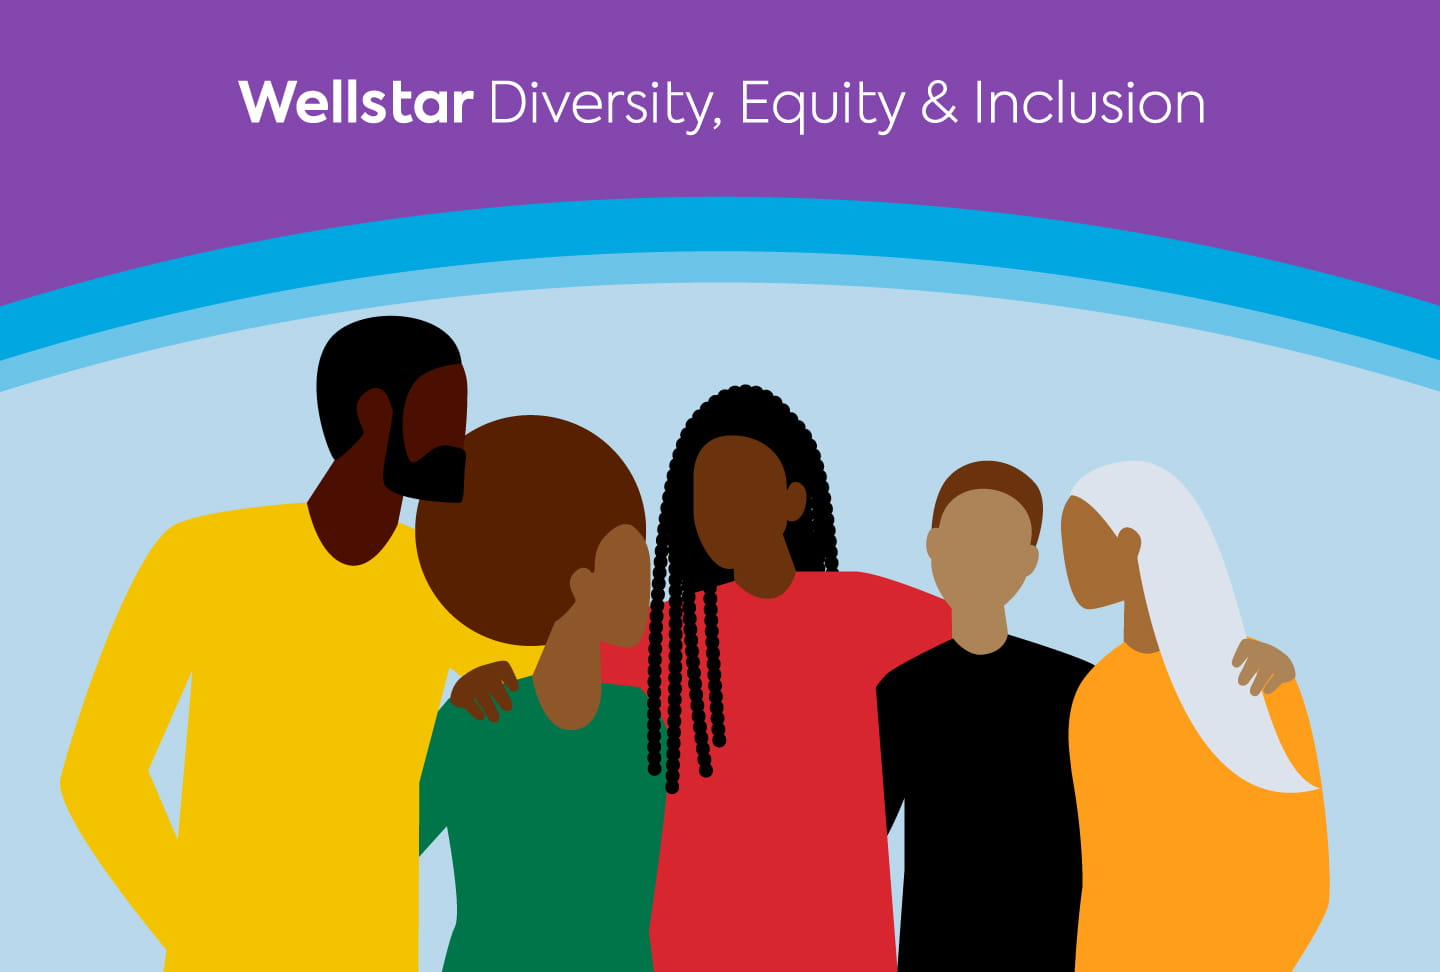 Illustration of people standing together. Text reads "Wellstar Diversity, Equity & Inclusion"